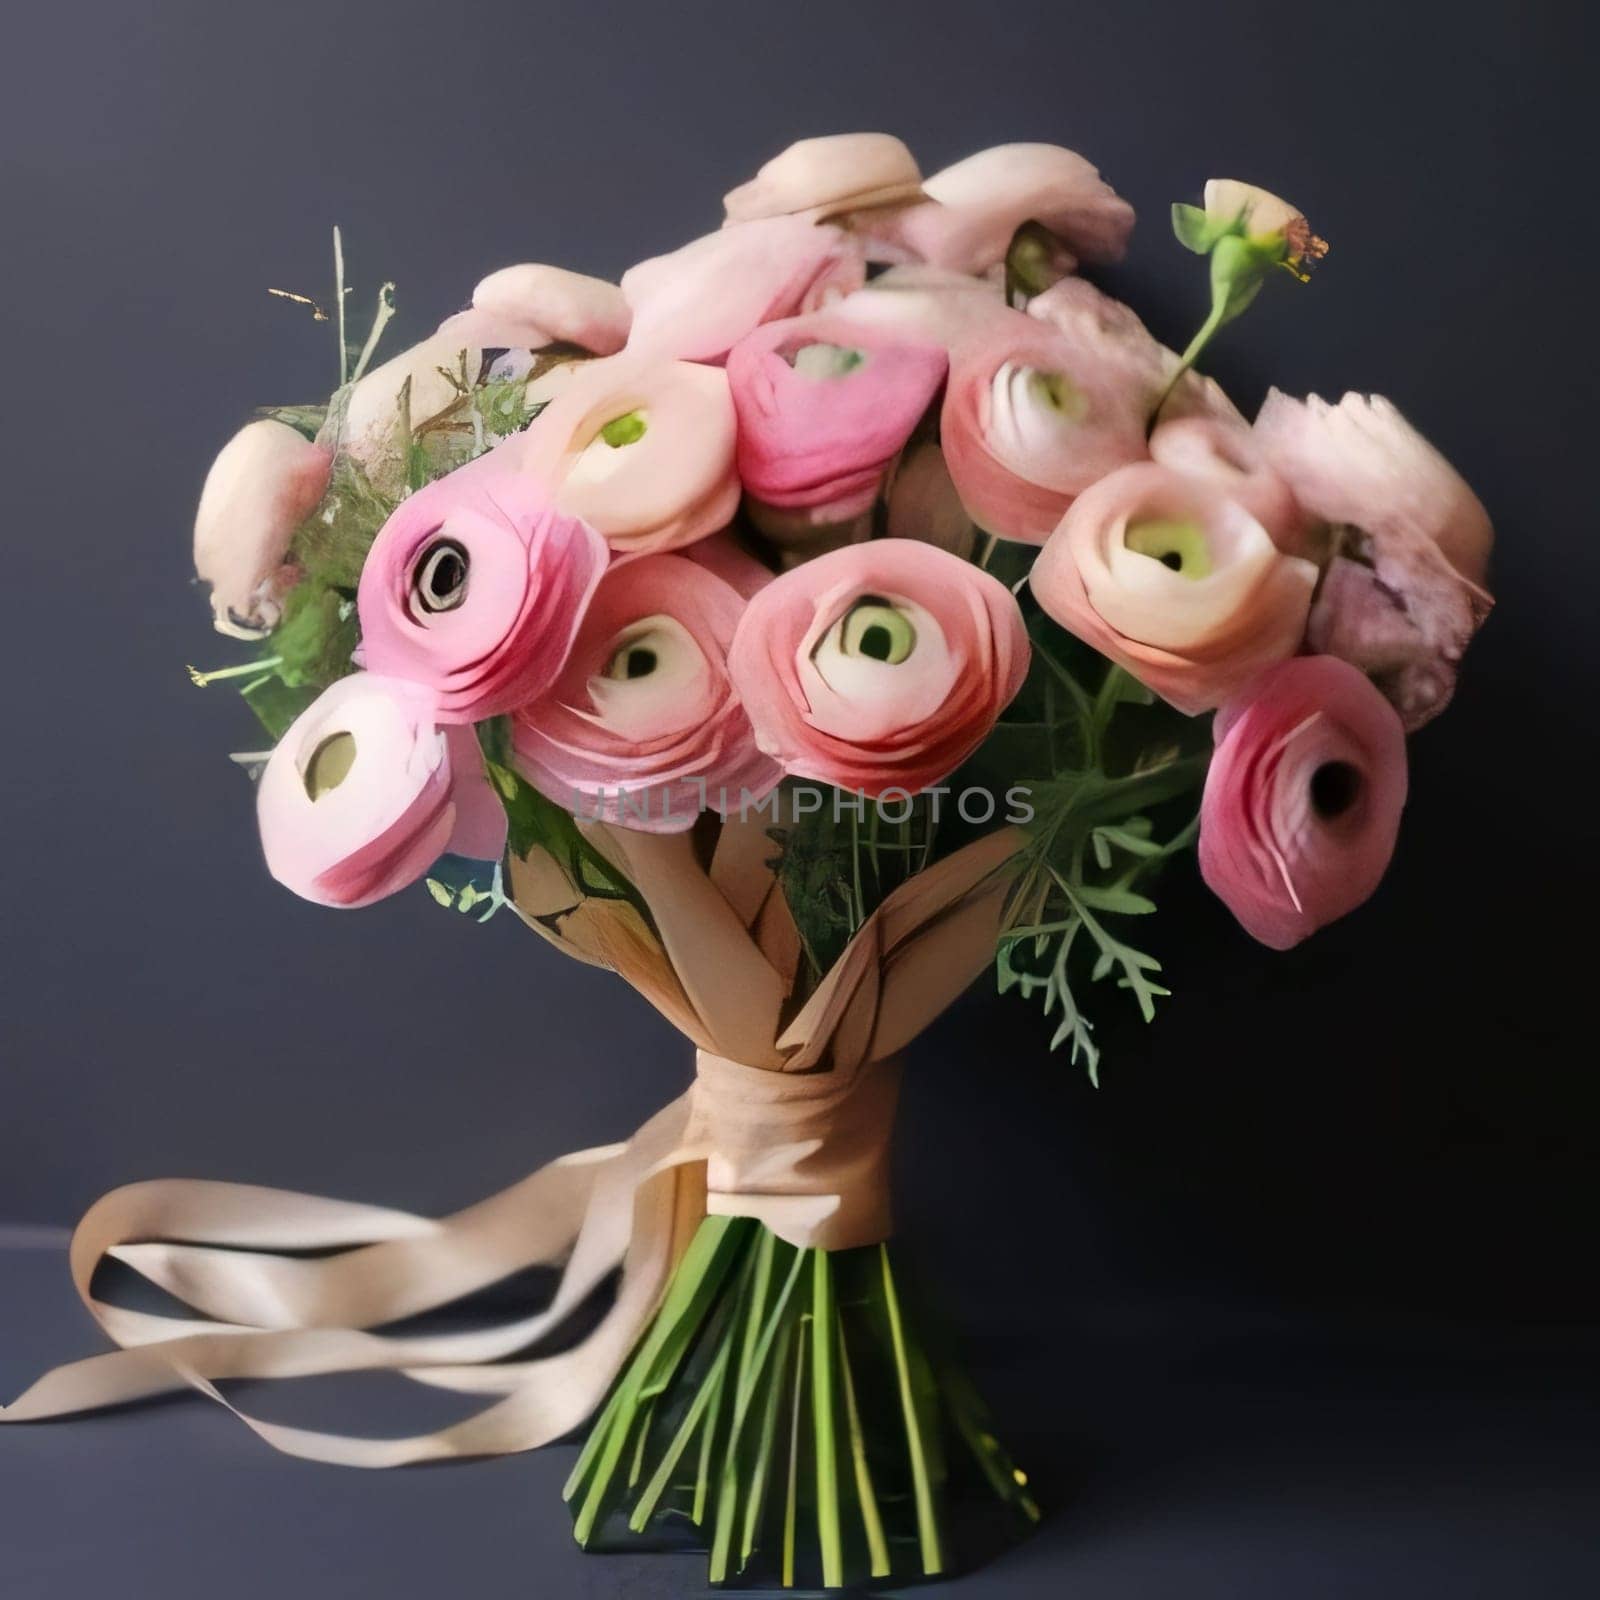 Pink bouquet of flowers decorated with a bow on a dark background. Flowering flowers, a symbol of spring, new life. A joyful time of nature waking up to life.